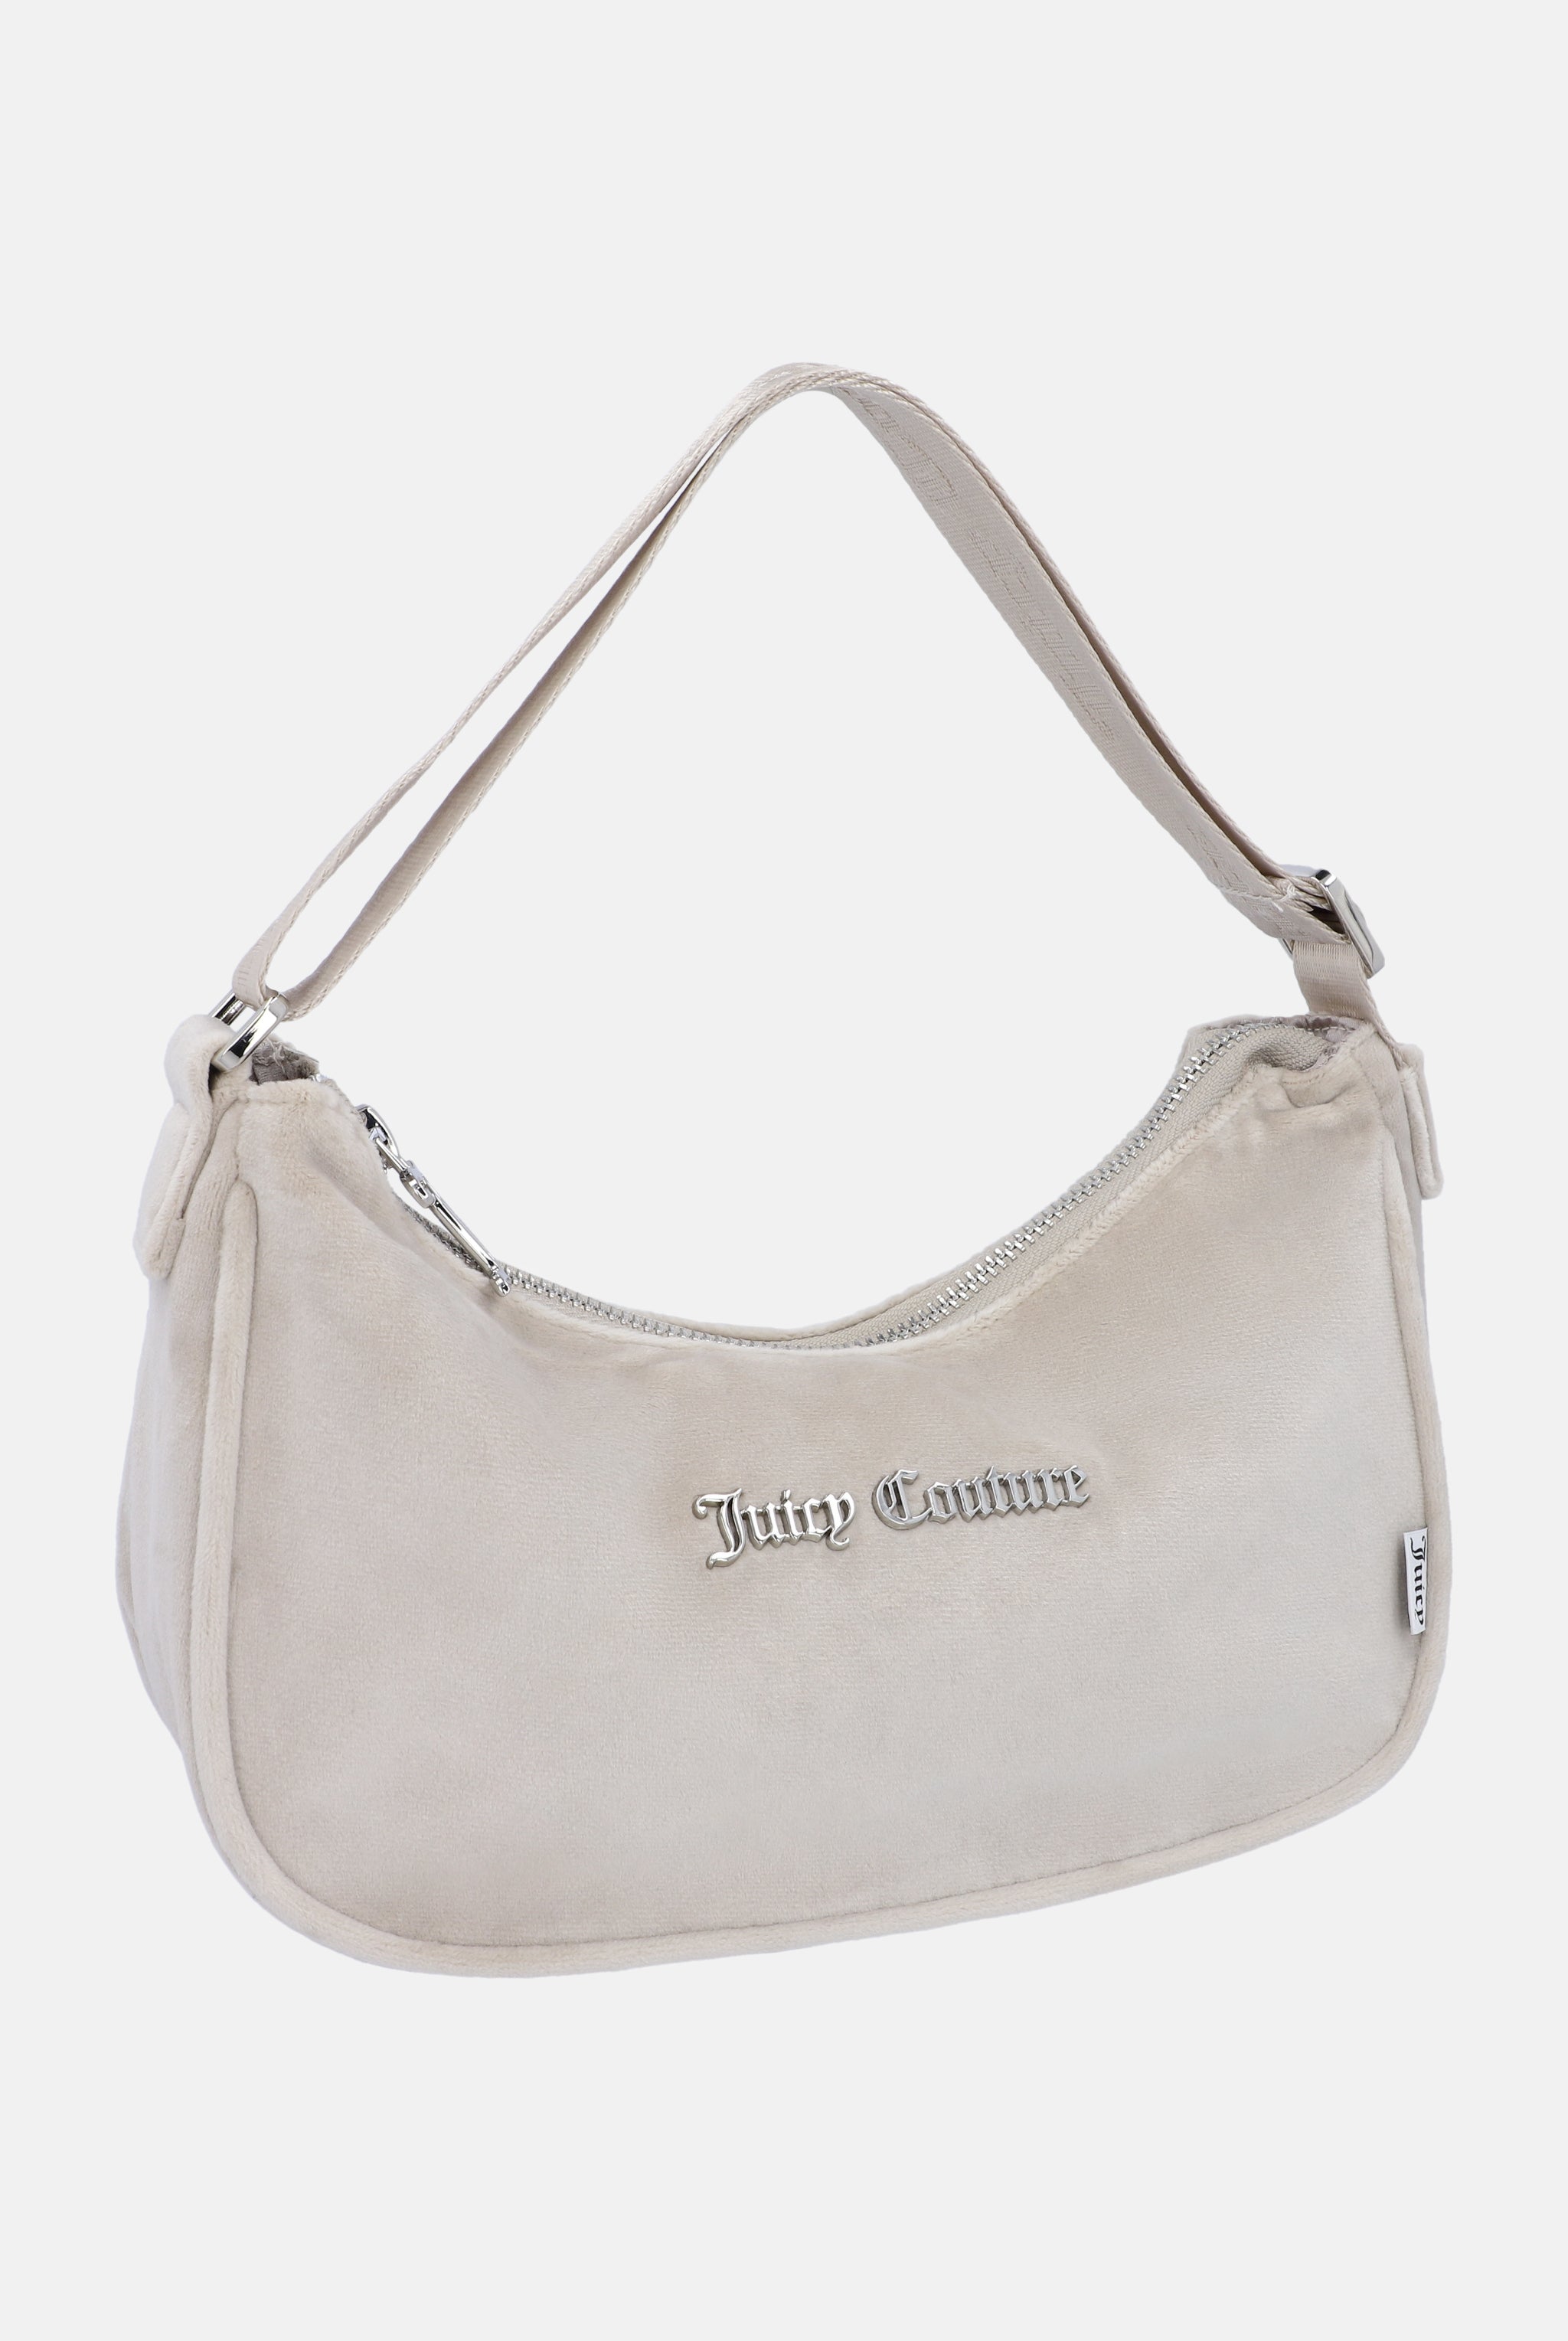 Juicy Couture Bags & Accessories in Clothing - Walmart.com